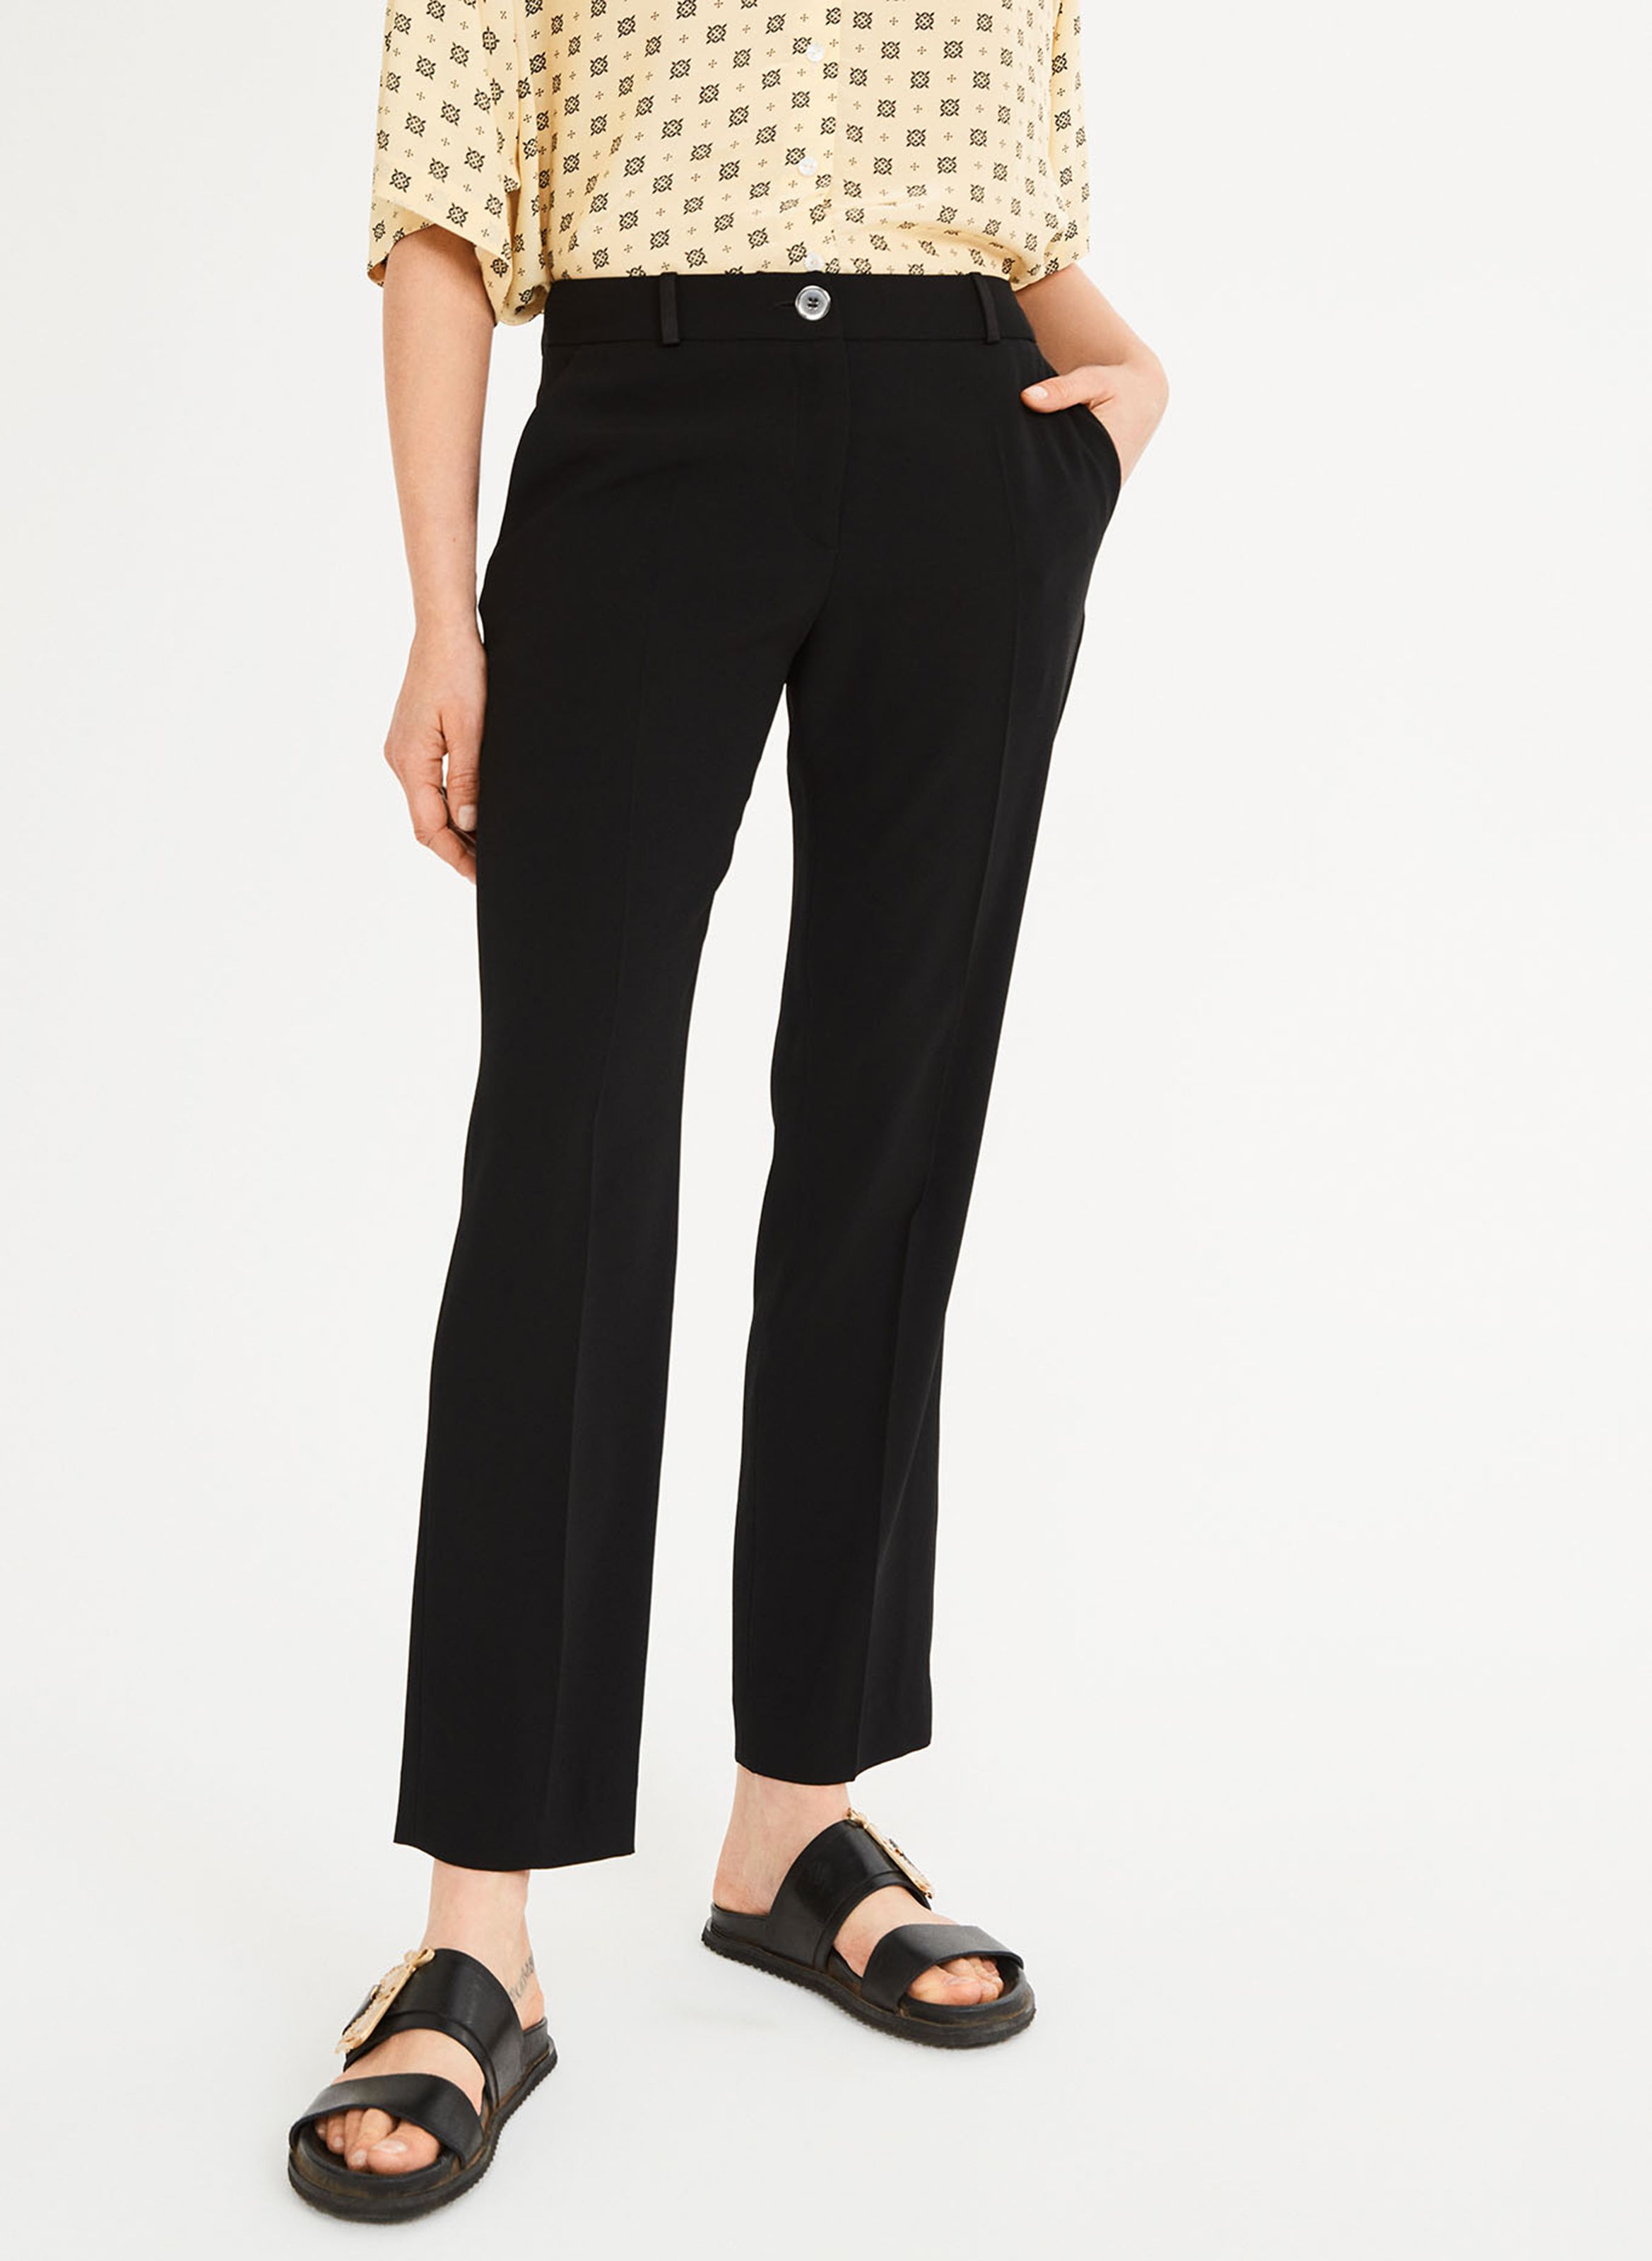 Claudie Pierlot Synthetic Ribbed-knit leggings in Black Slacks and Chinos Straight-leg trousers Womens Clothing Trousers 